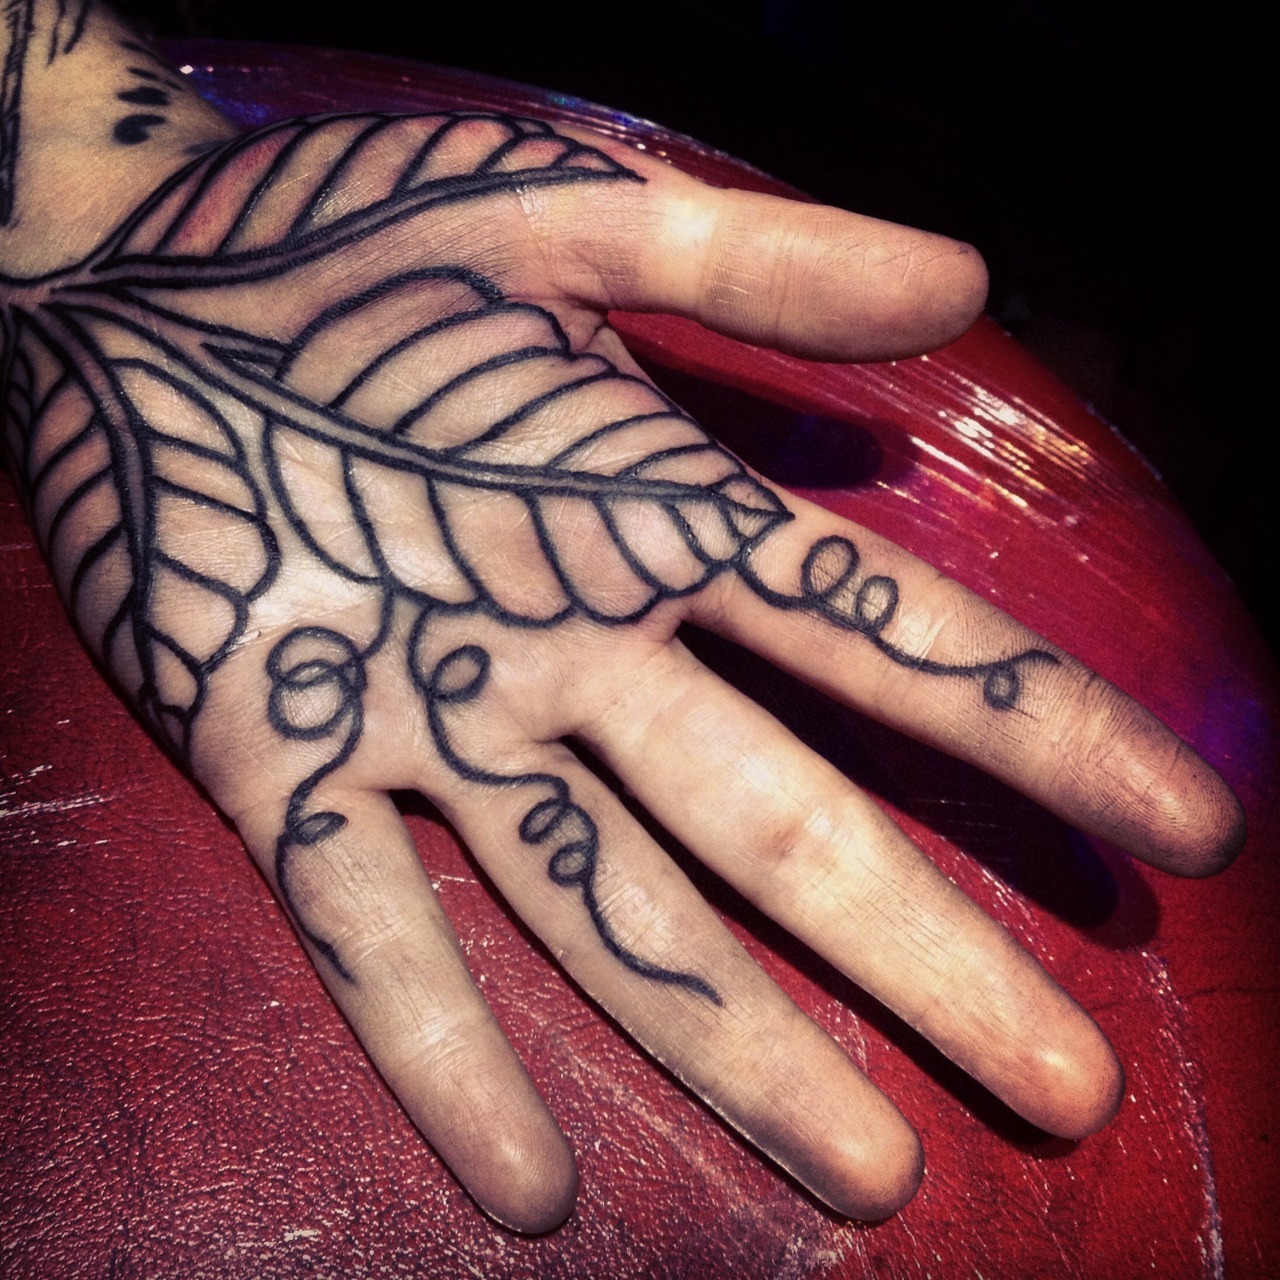 modificationinspiration:
“namesofthedead:
“ Leaves and tendrils on the palm of one of the toughest ladies I know
”